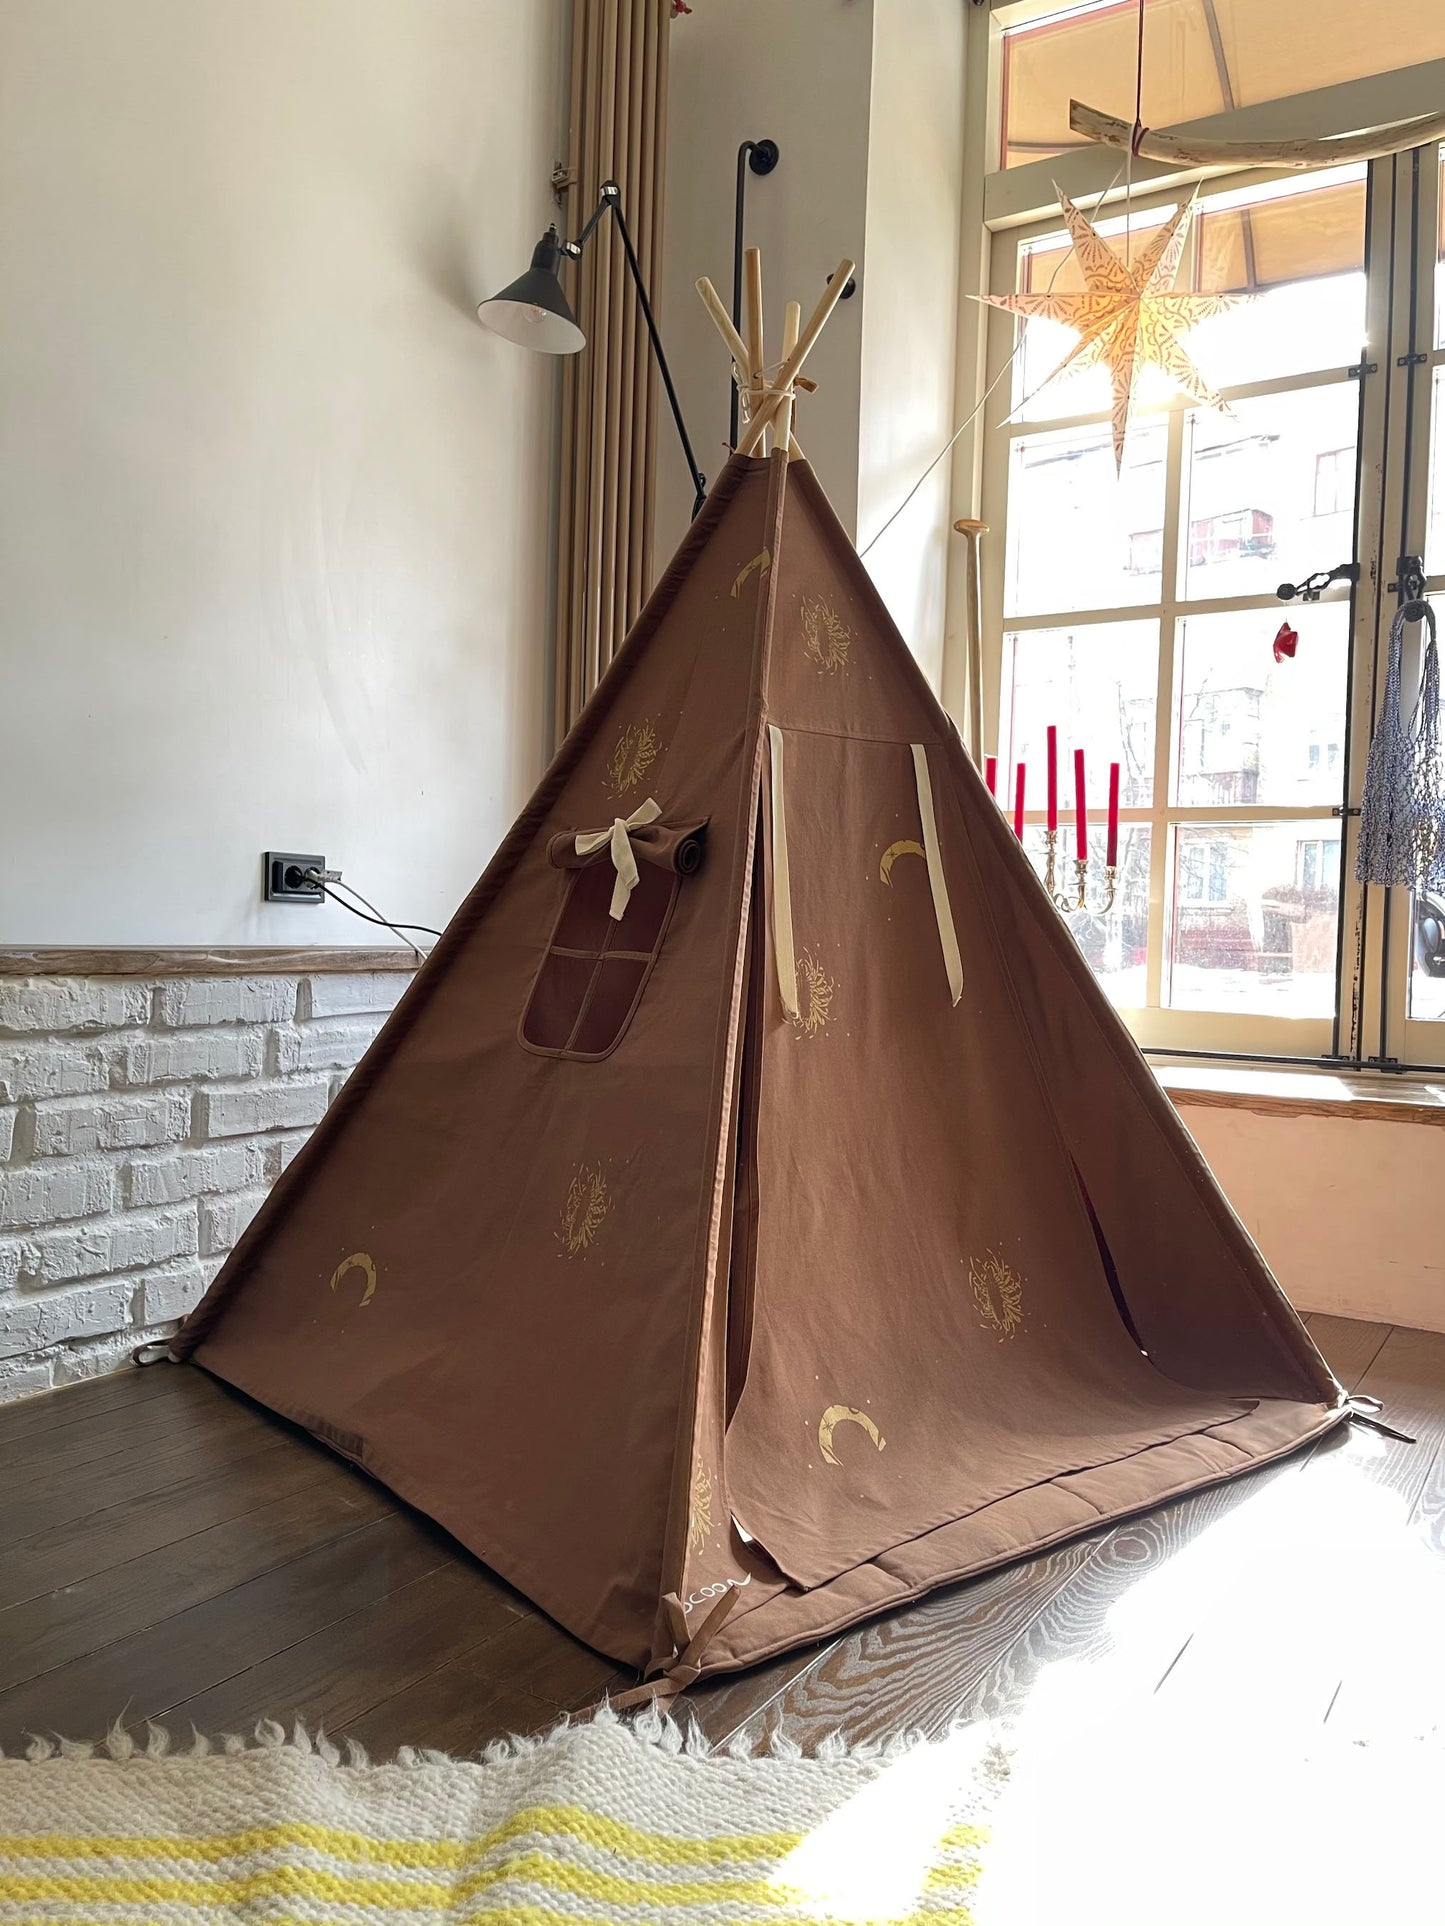 Play House Toys | Indoor Teepee Tent | Kids Room Teepee | Fancy Playhouse | Princess Castle Playhouse Tent - Christmas gift